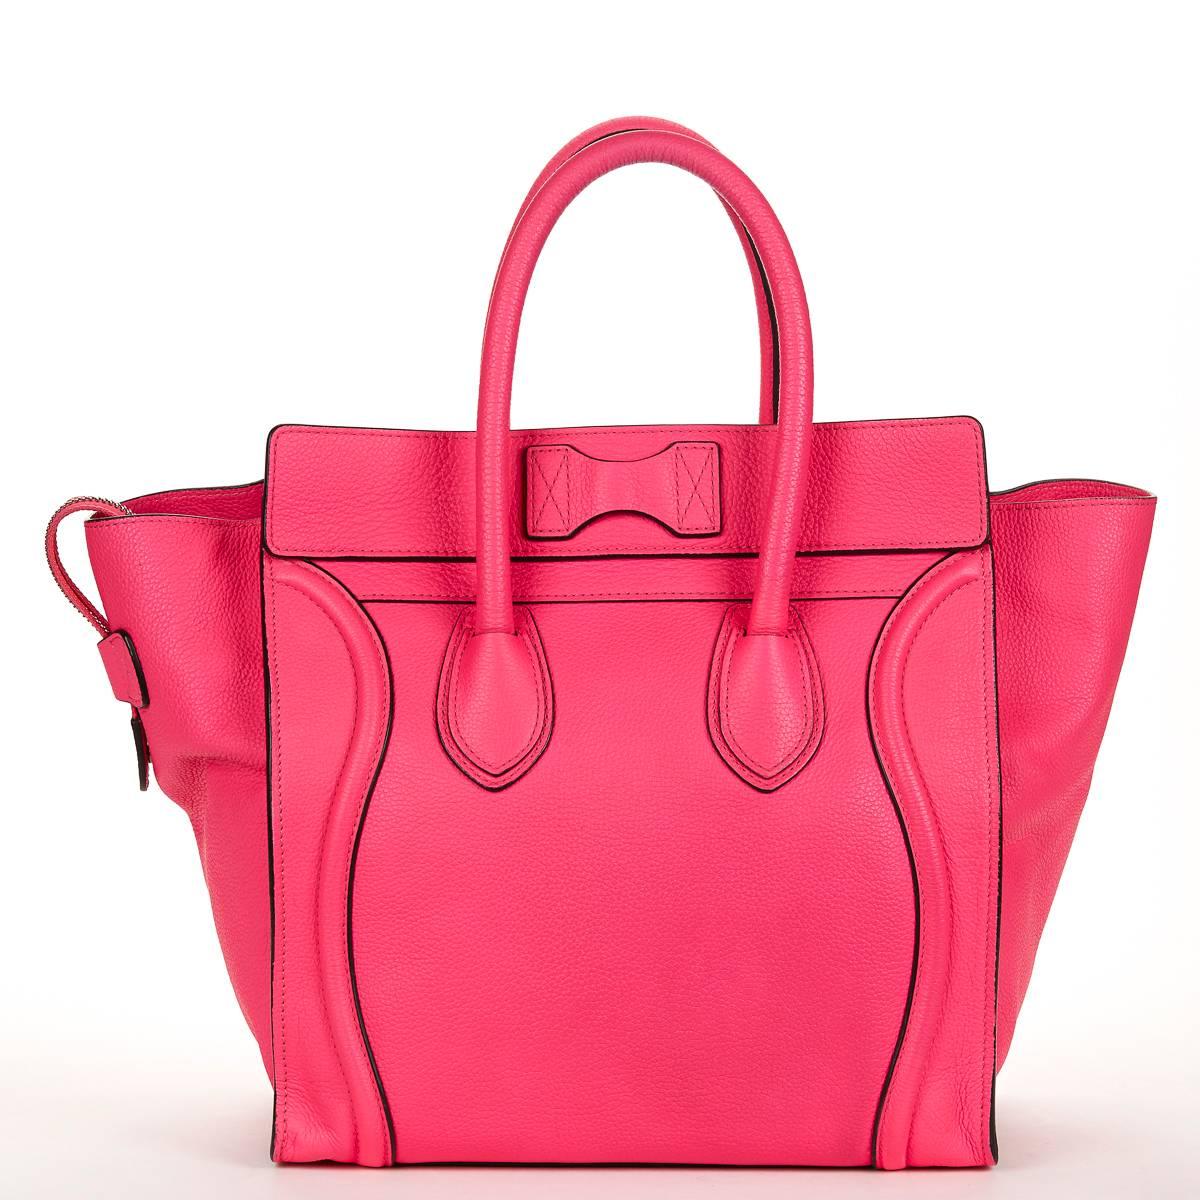 2010s Céline Neon Pink Drummed Leather Mini Luggage Tote 1